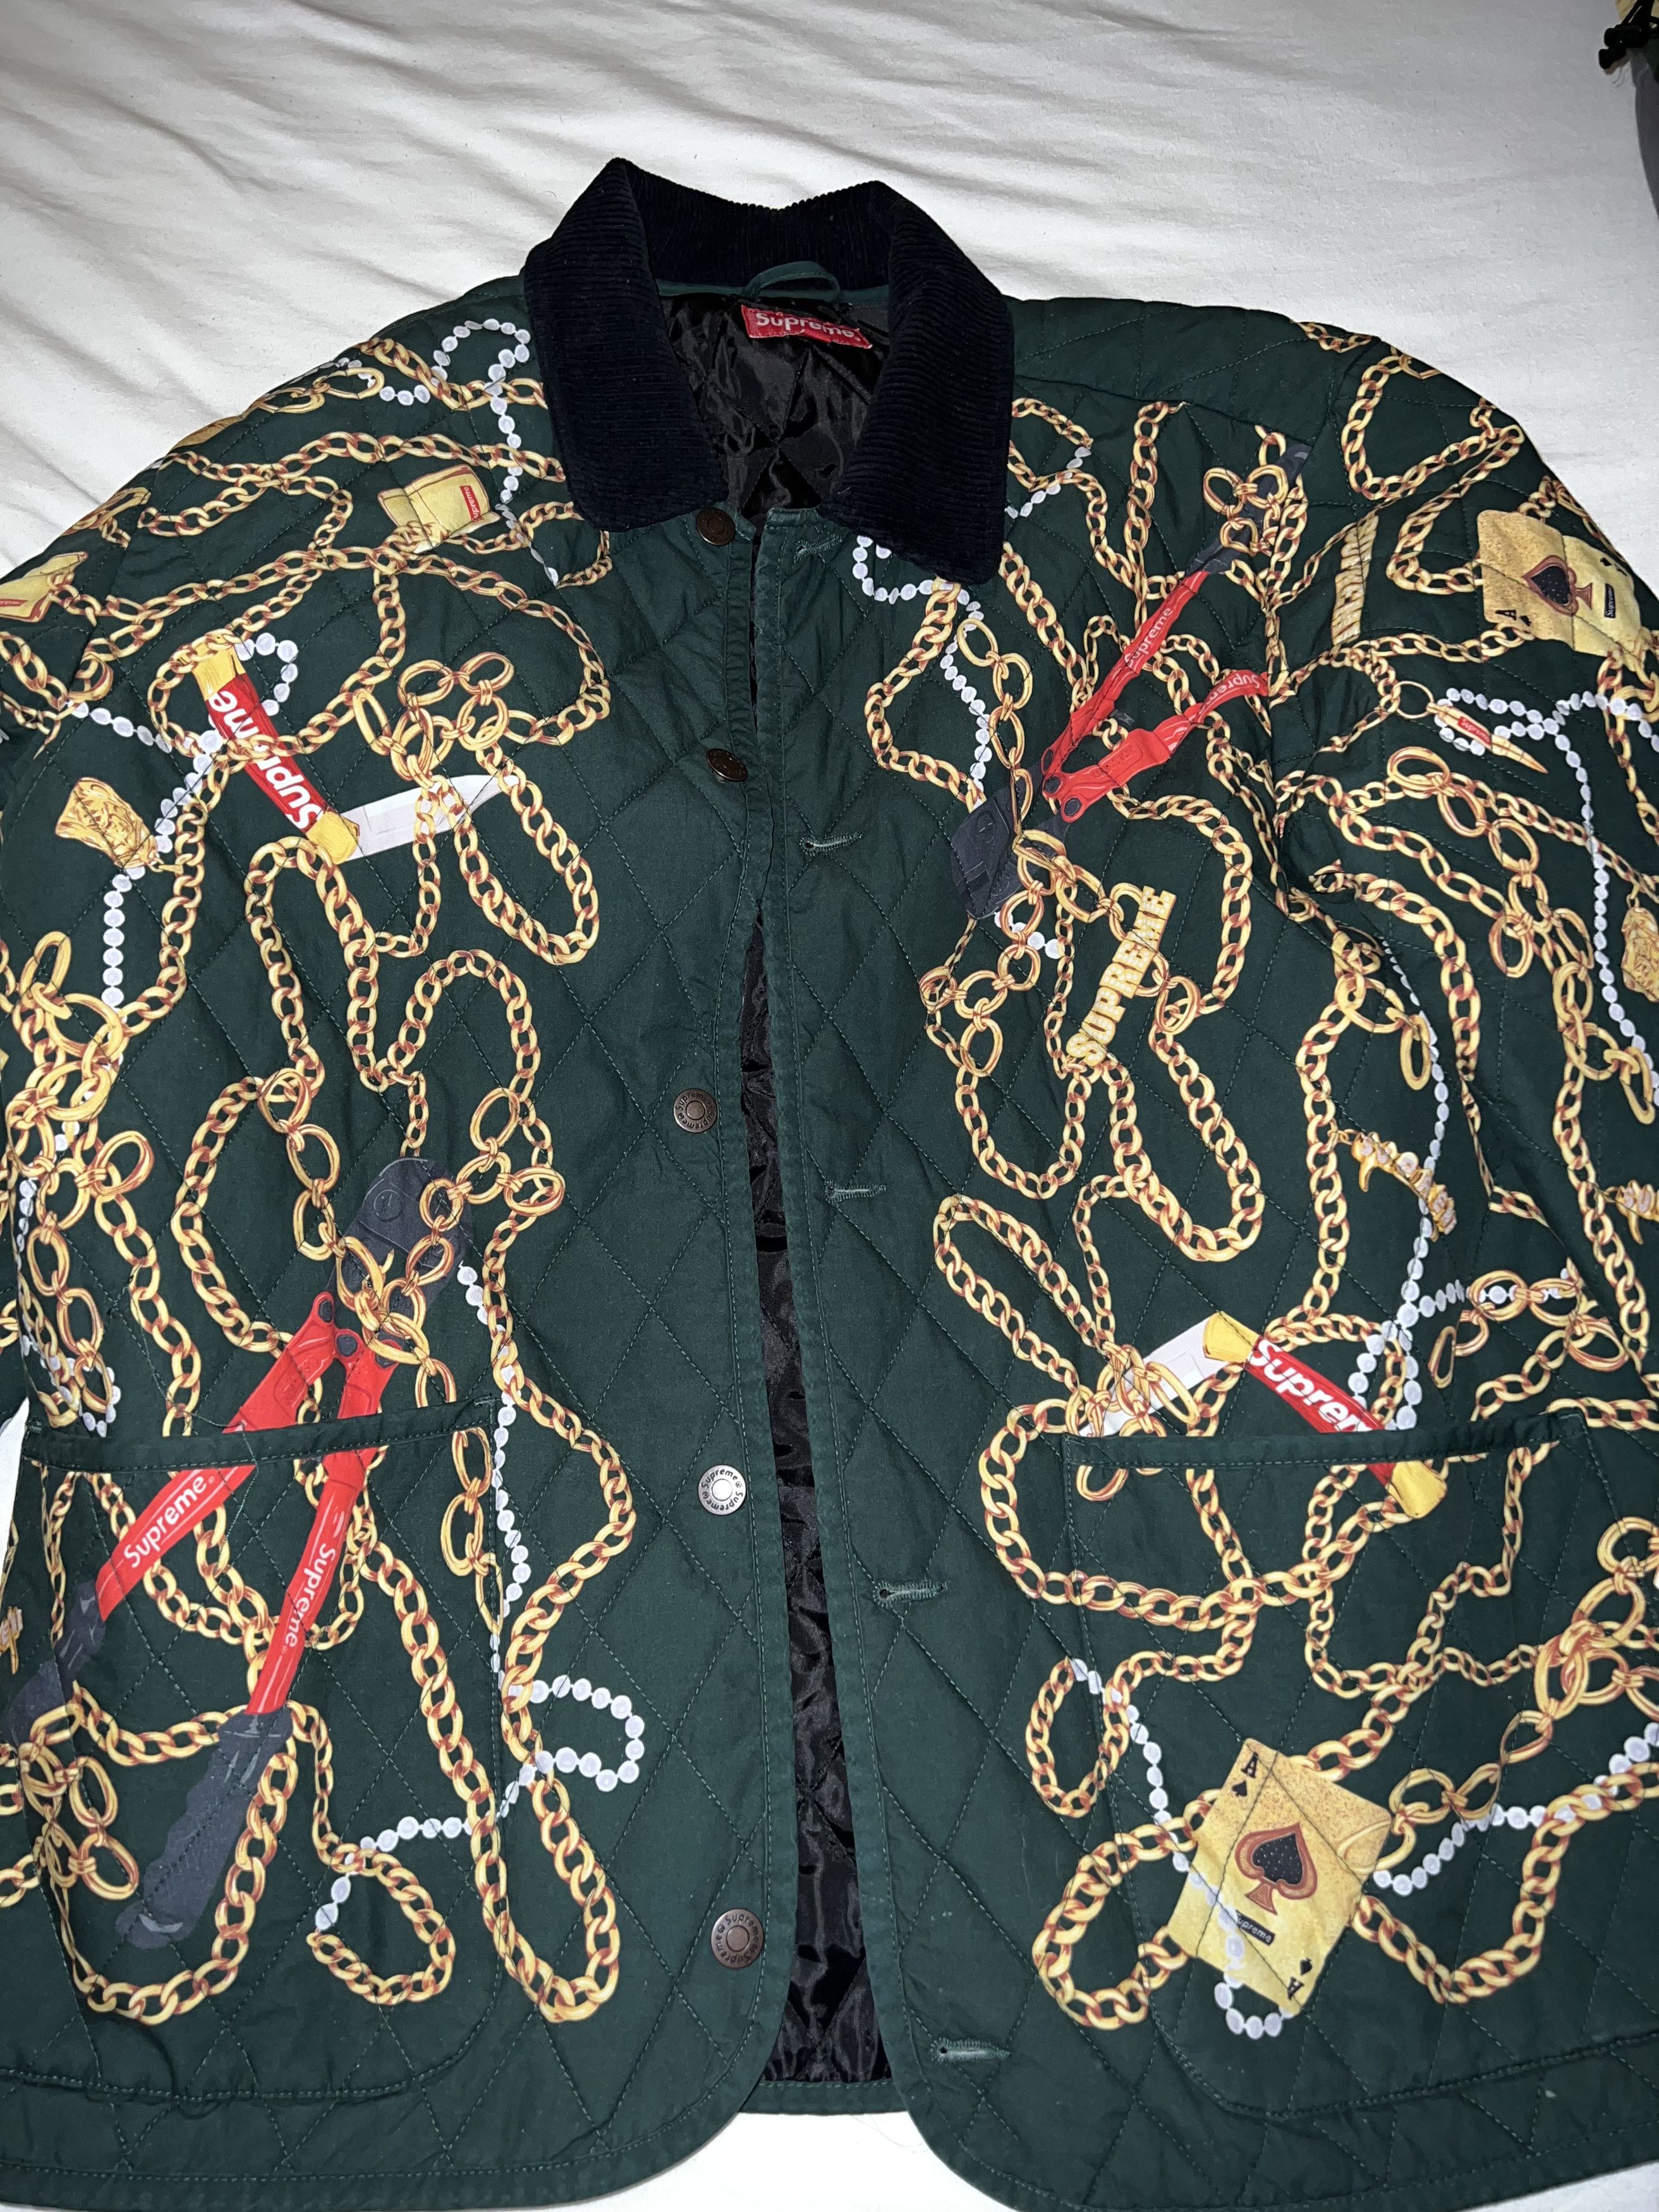 Supreme Supreme Chains Quilted Jacket | Grailed